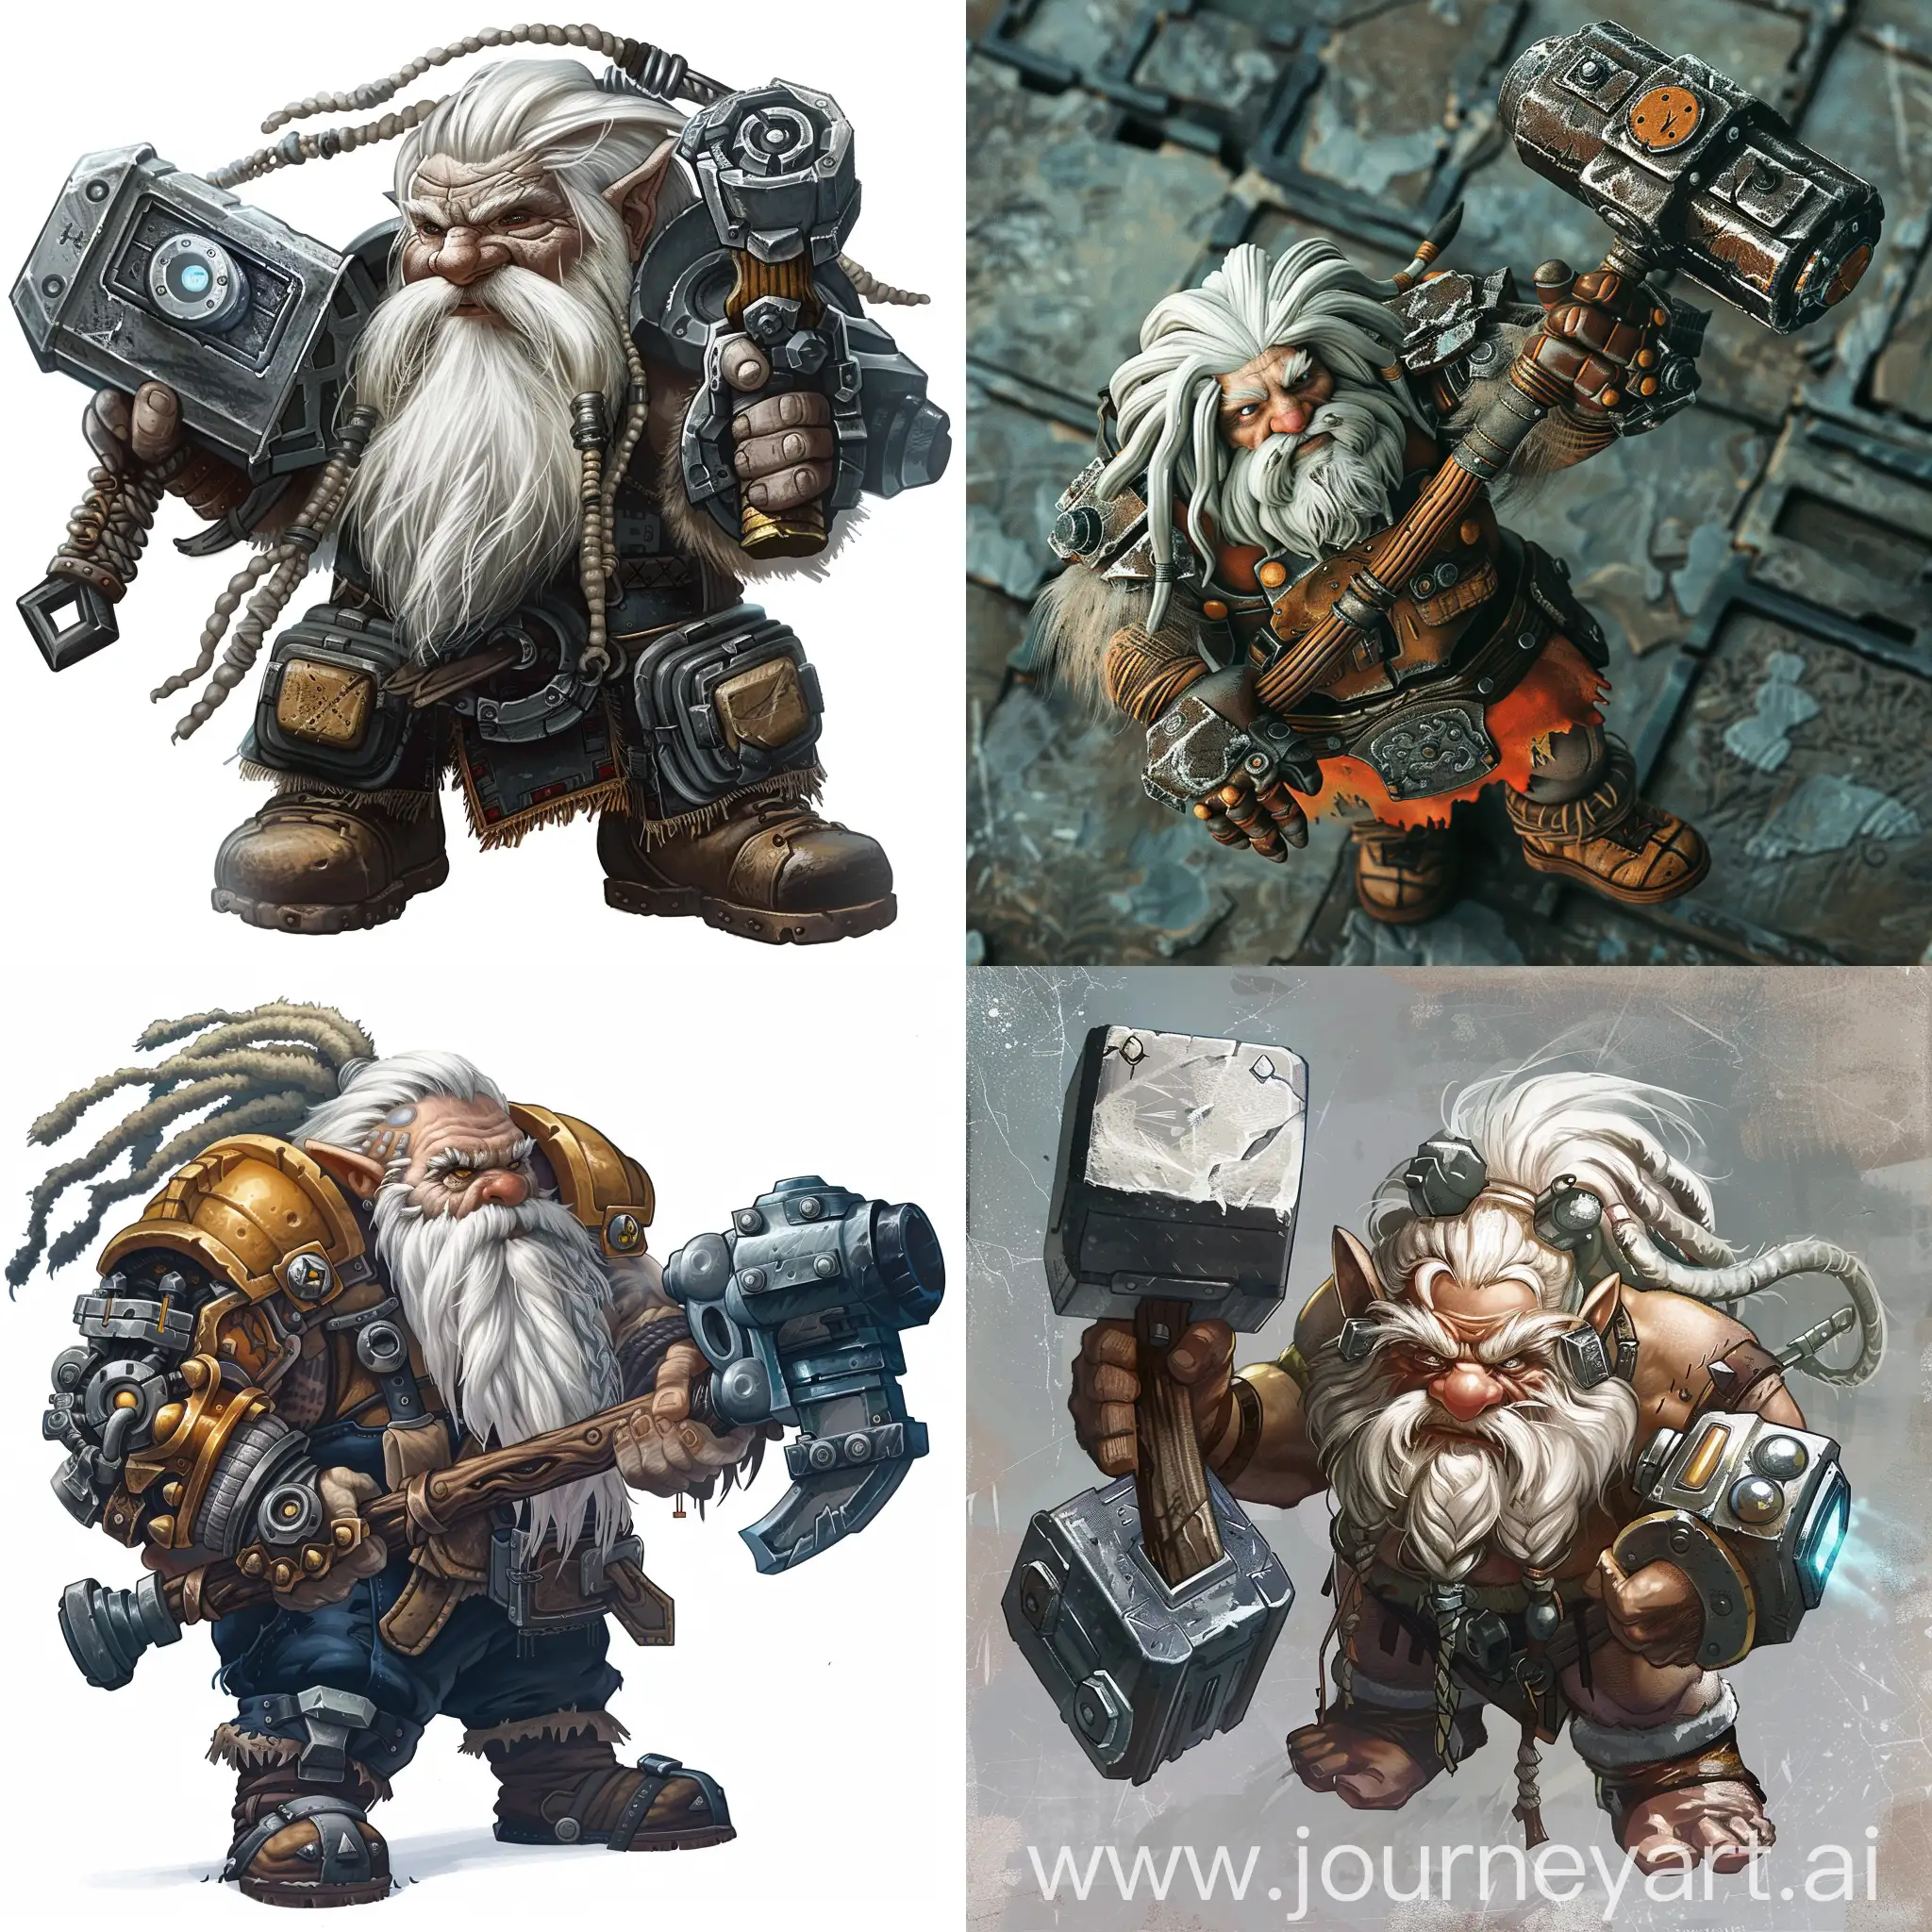 topdown picture of a dwarf with a metal arm carrying a large mechanical hammer white hair large beard dreadslocks. Dnd, dungeons and dragons,  token topdown style